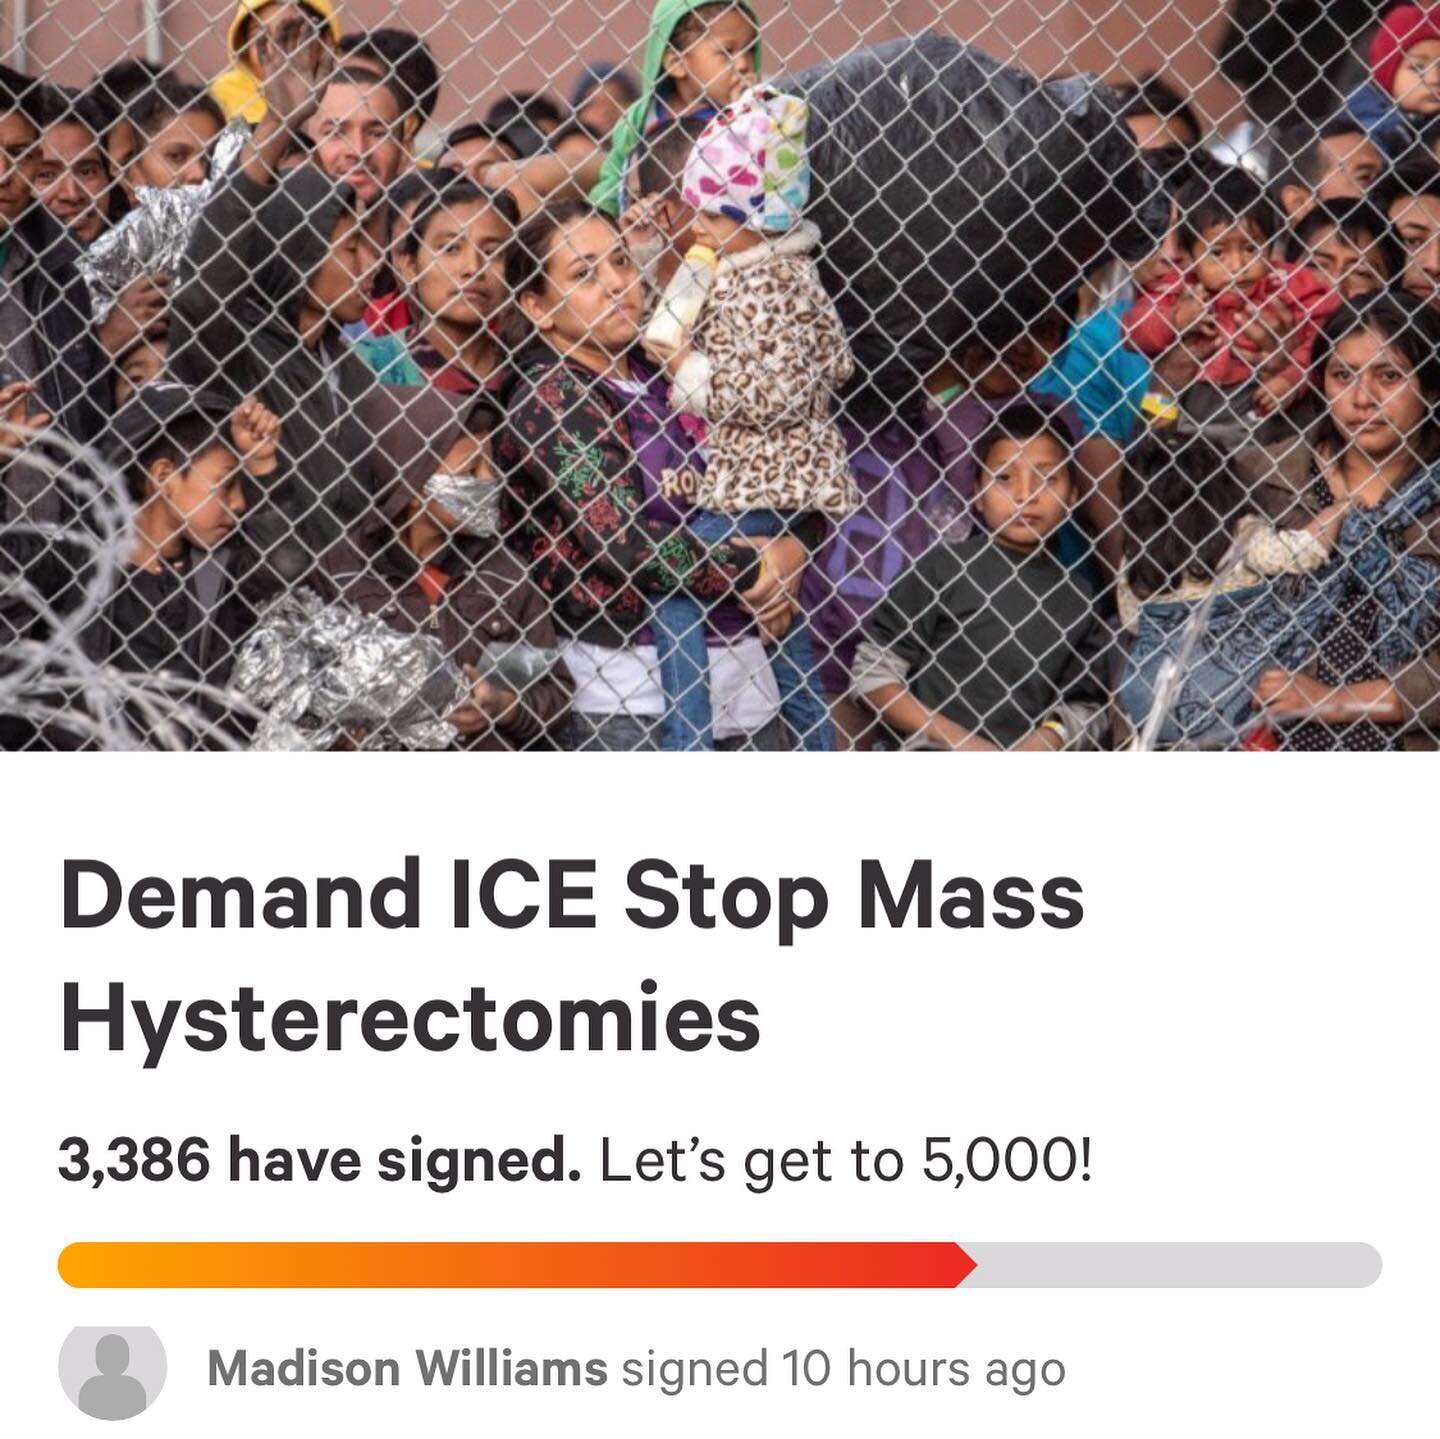 More Care2 and Change.org petitions. Defend RGB&rsquo;s wish to postpone filling her seat until after inauguration, stand up for Women in ICE detention centers, and stand up for the Uyghur community. The first petition can be found on Change.Org, the